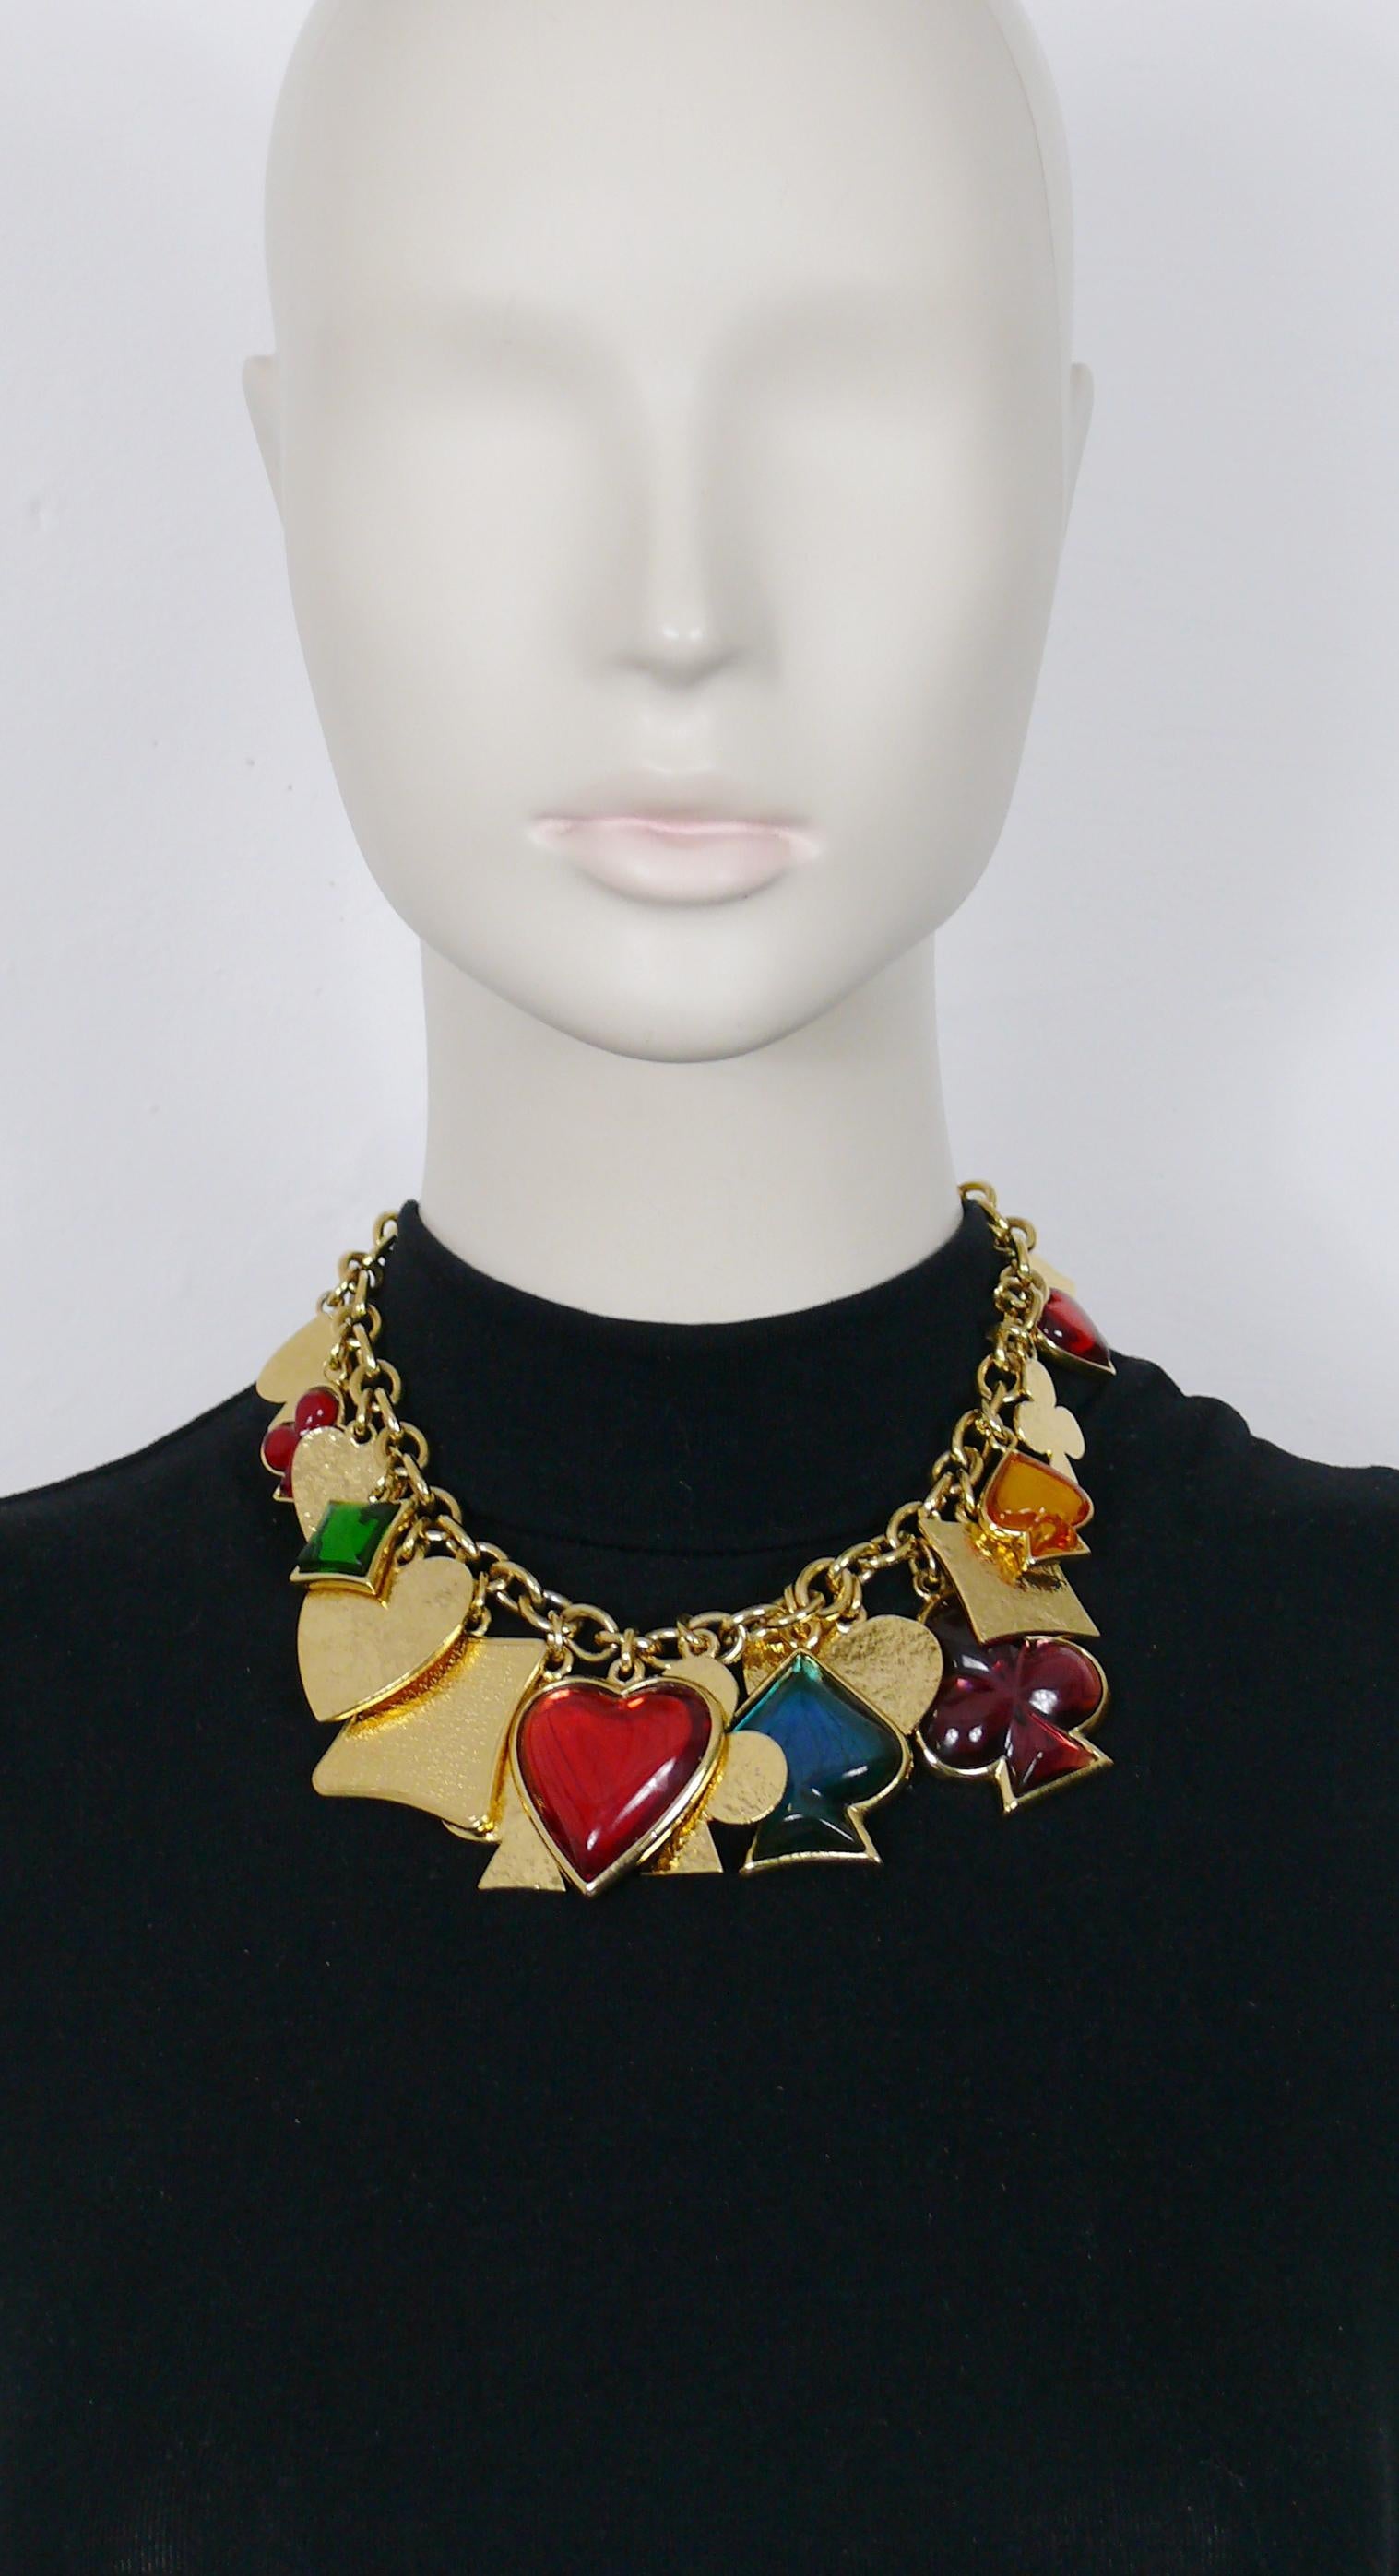 YVES SAINT LAURENT by ROBERT GOOSSENS vintage gold playing card charm necklace featuring multi colored resin cabochons and plain metal charms in playing card symbols : hearts, clubs, spades and diamonds.

Adjustable lobster clasp closure.

Embossed